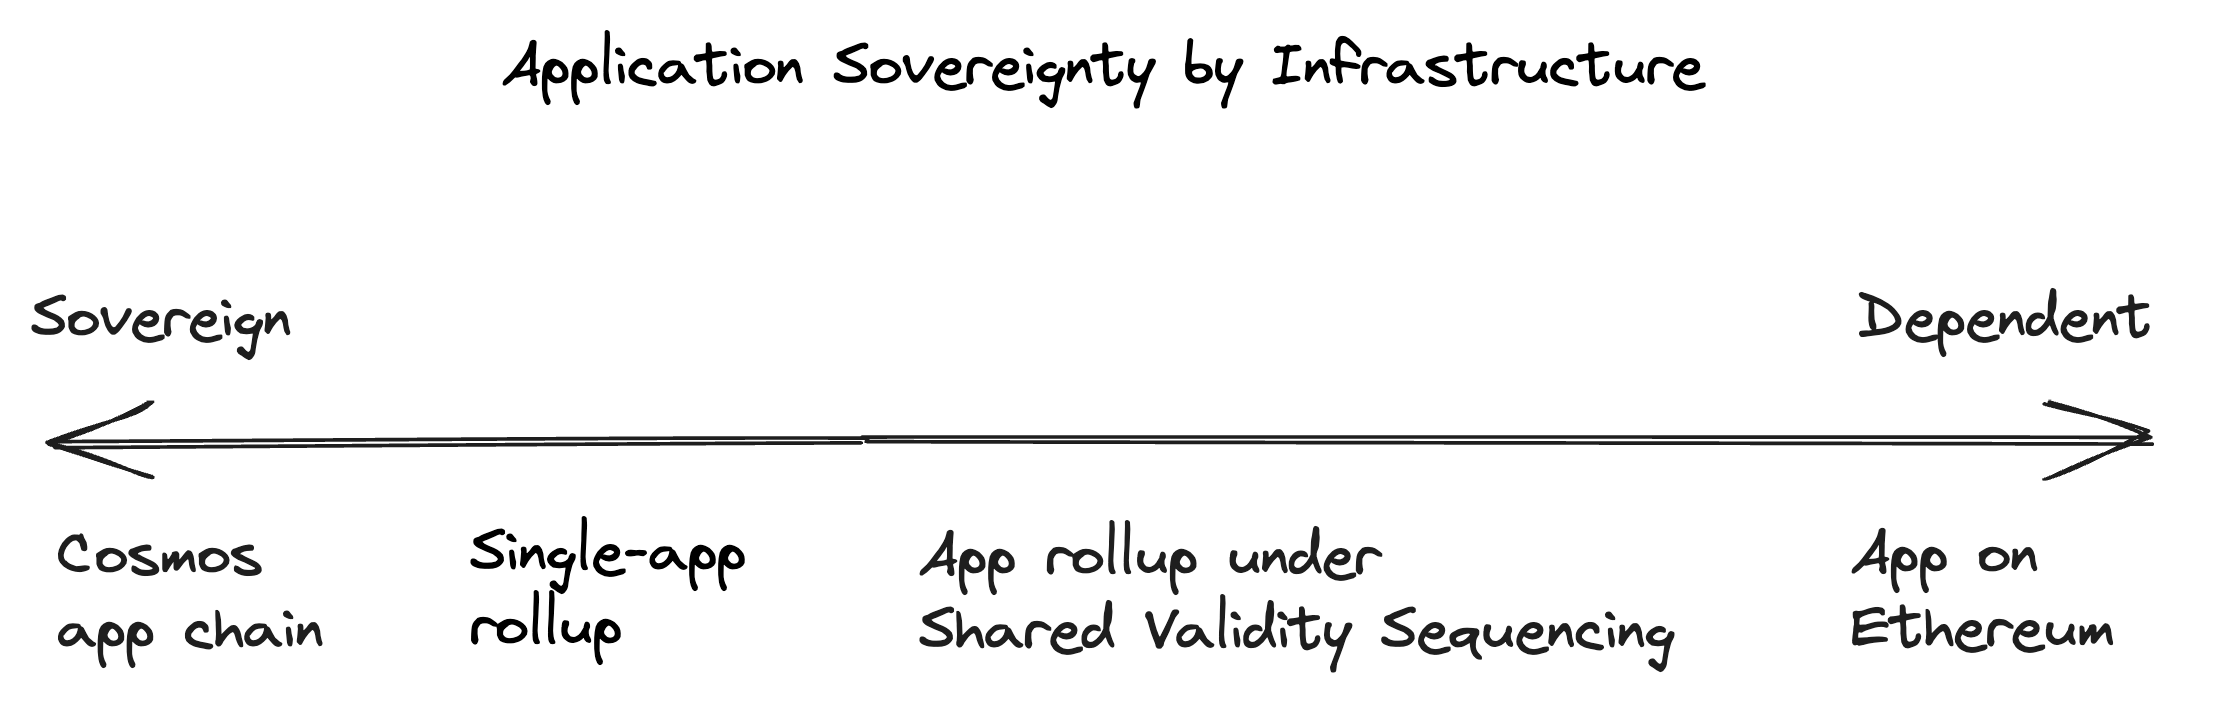 Application Sovereignty